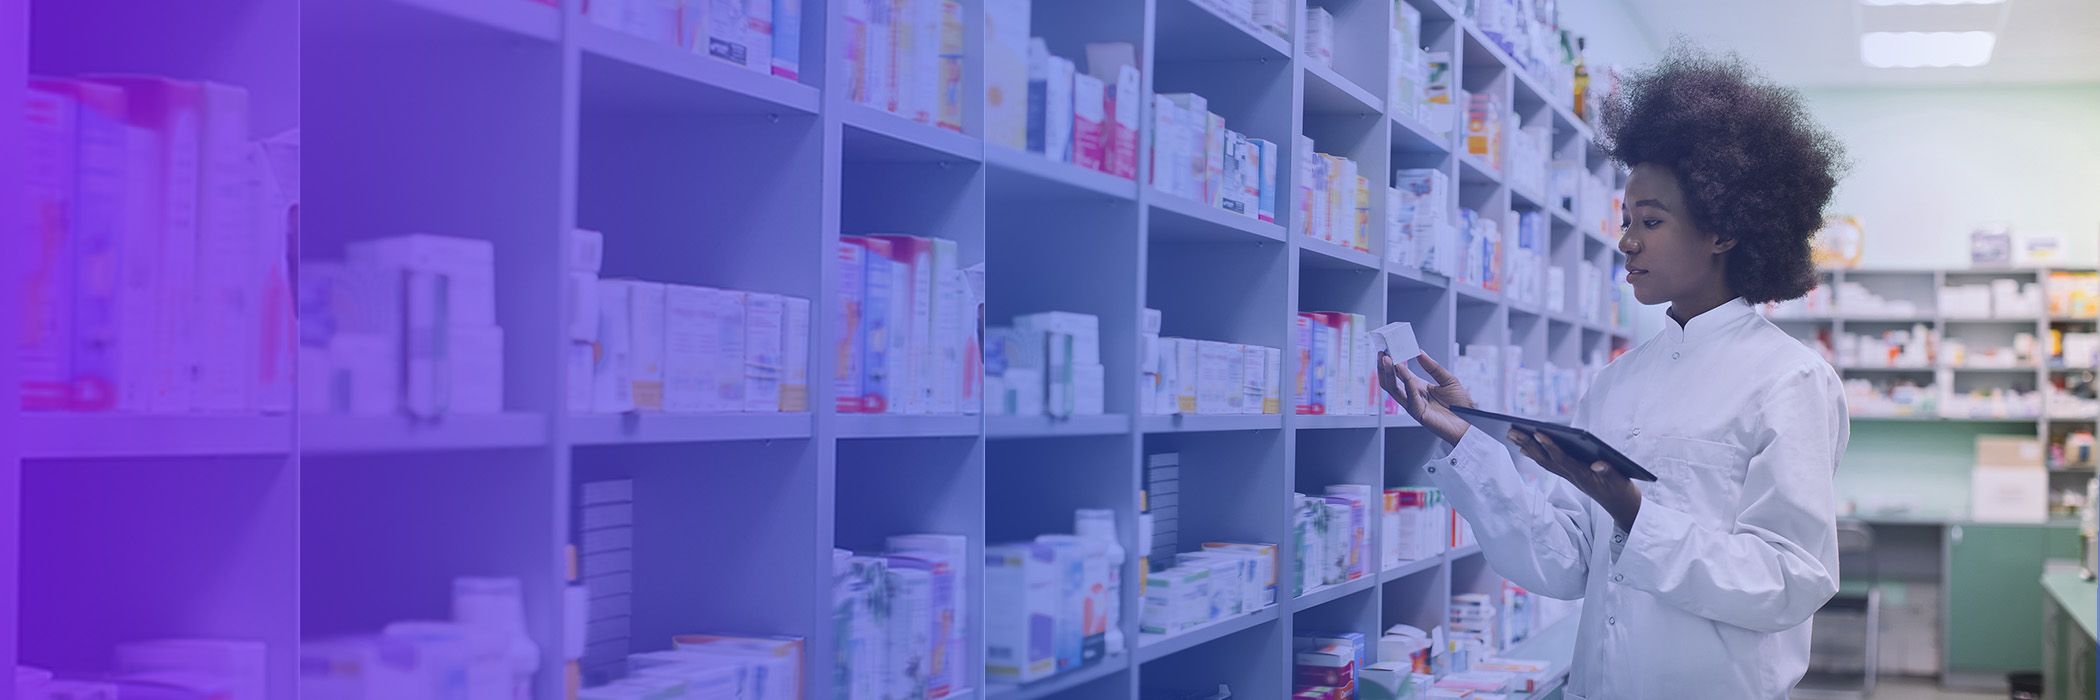 nurse sorting medication - Site Selection for Life Sciences Companies in Africa